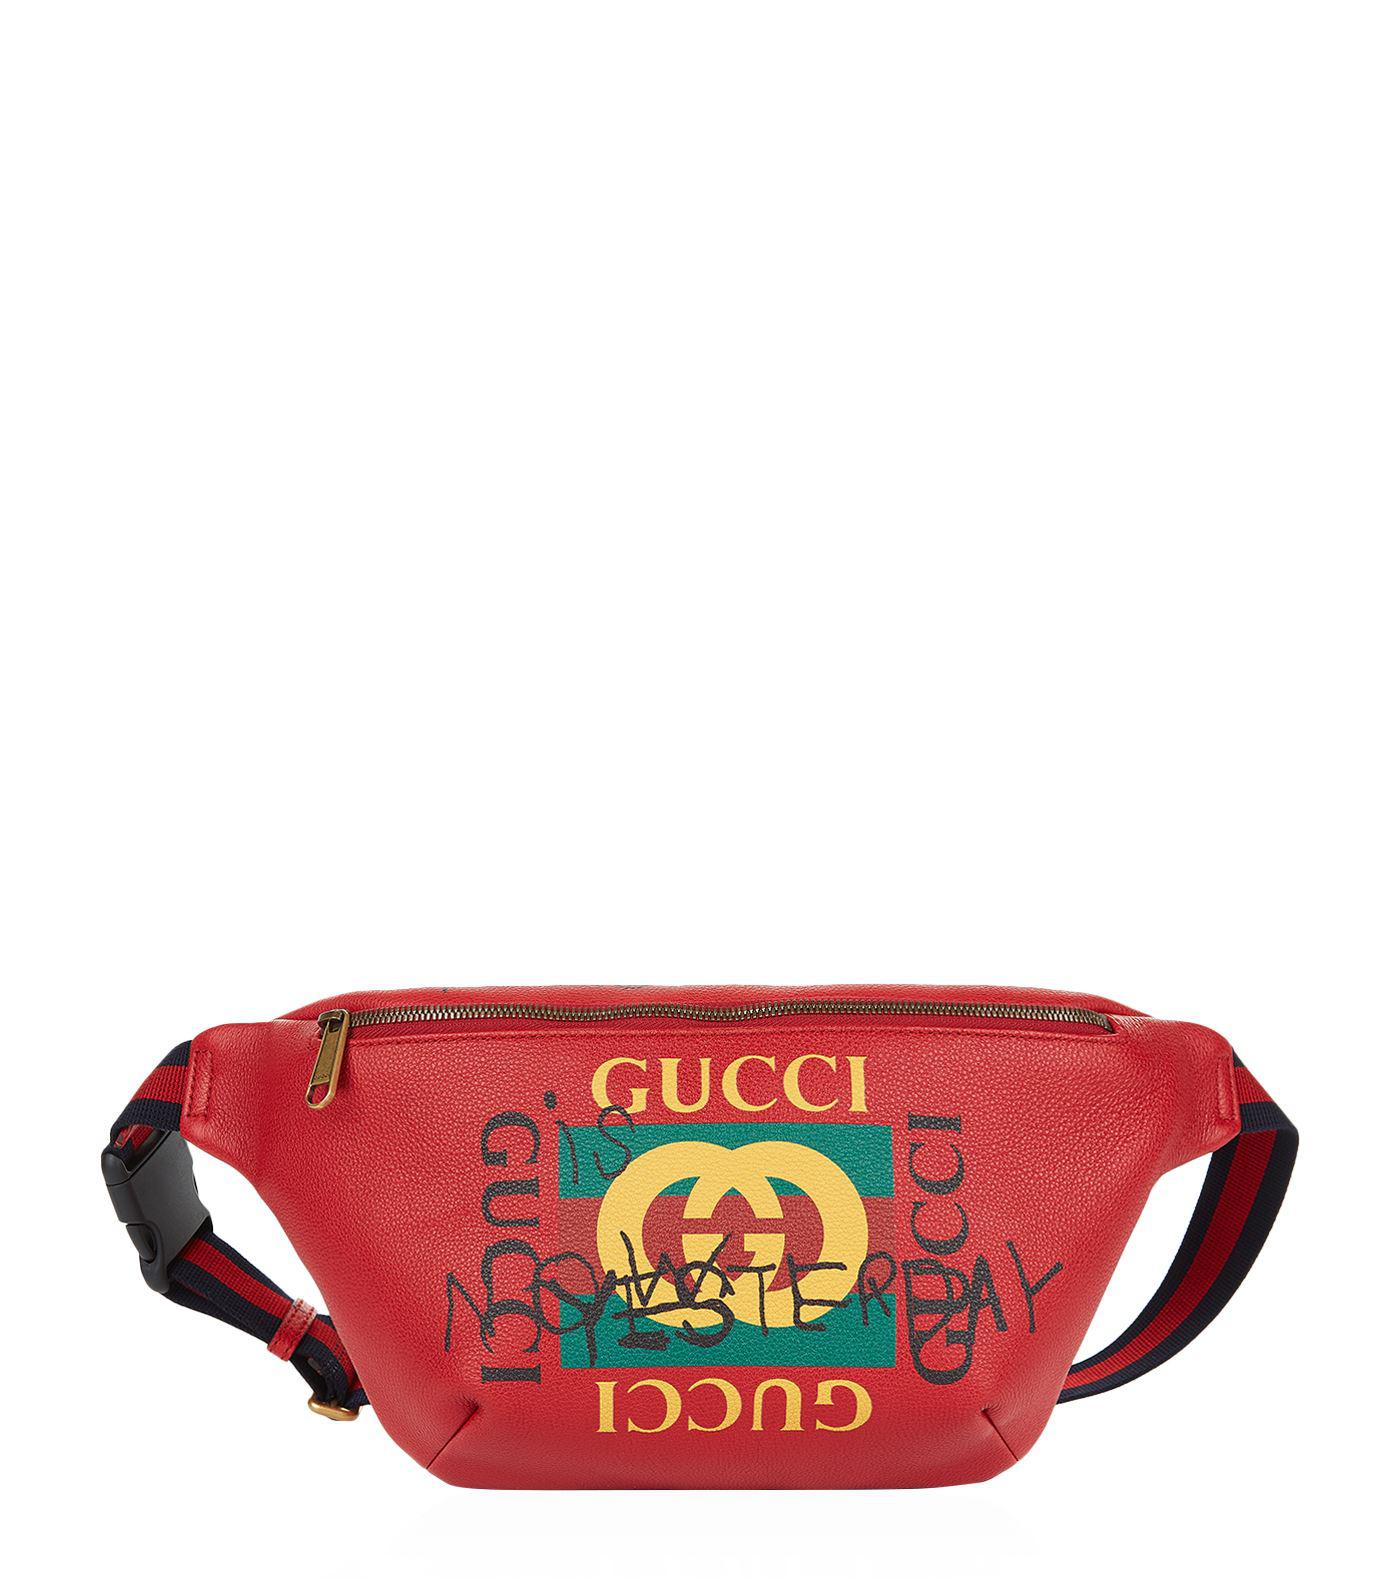 gucci tomorrow is now yesterday fanny pack